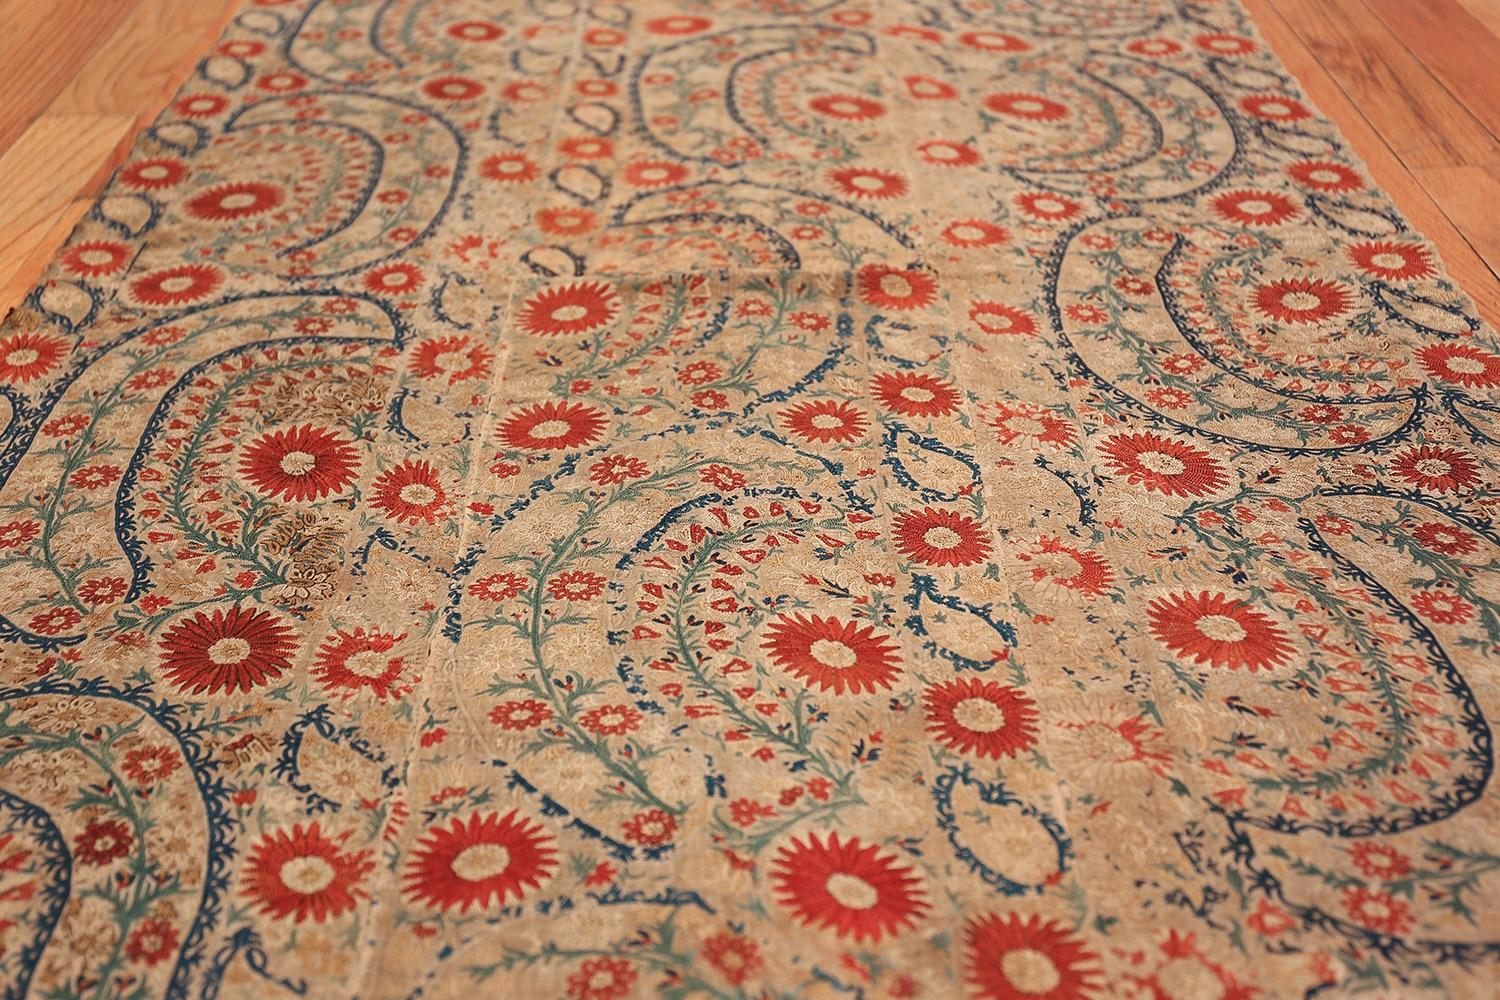 Refined Yet Rustic Antique Ottoman Textile Embroidery 3'2